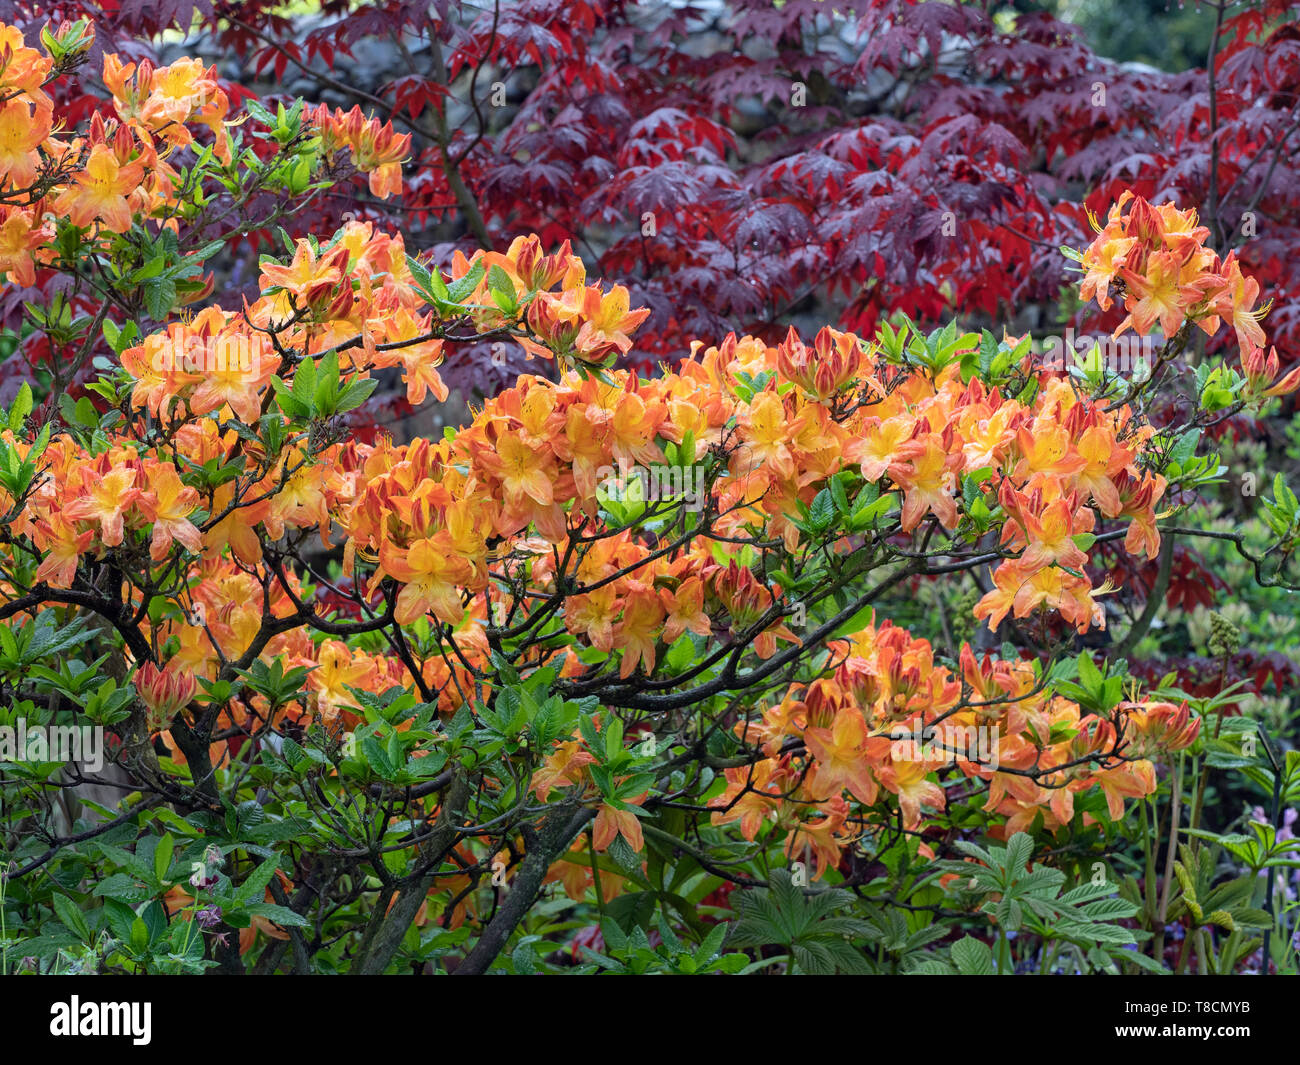 Japanese maple 'Bloodgood' with rhododendron in background Stock Photo